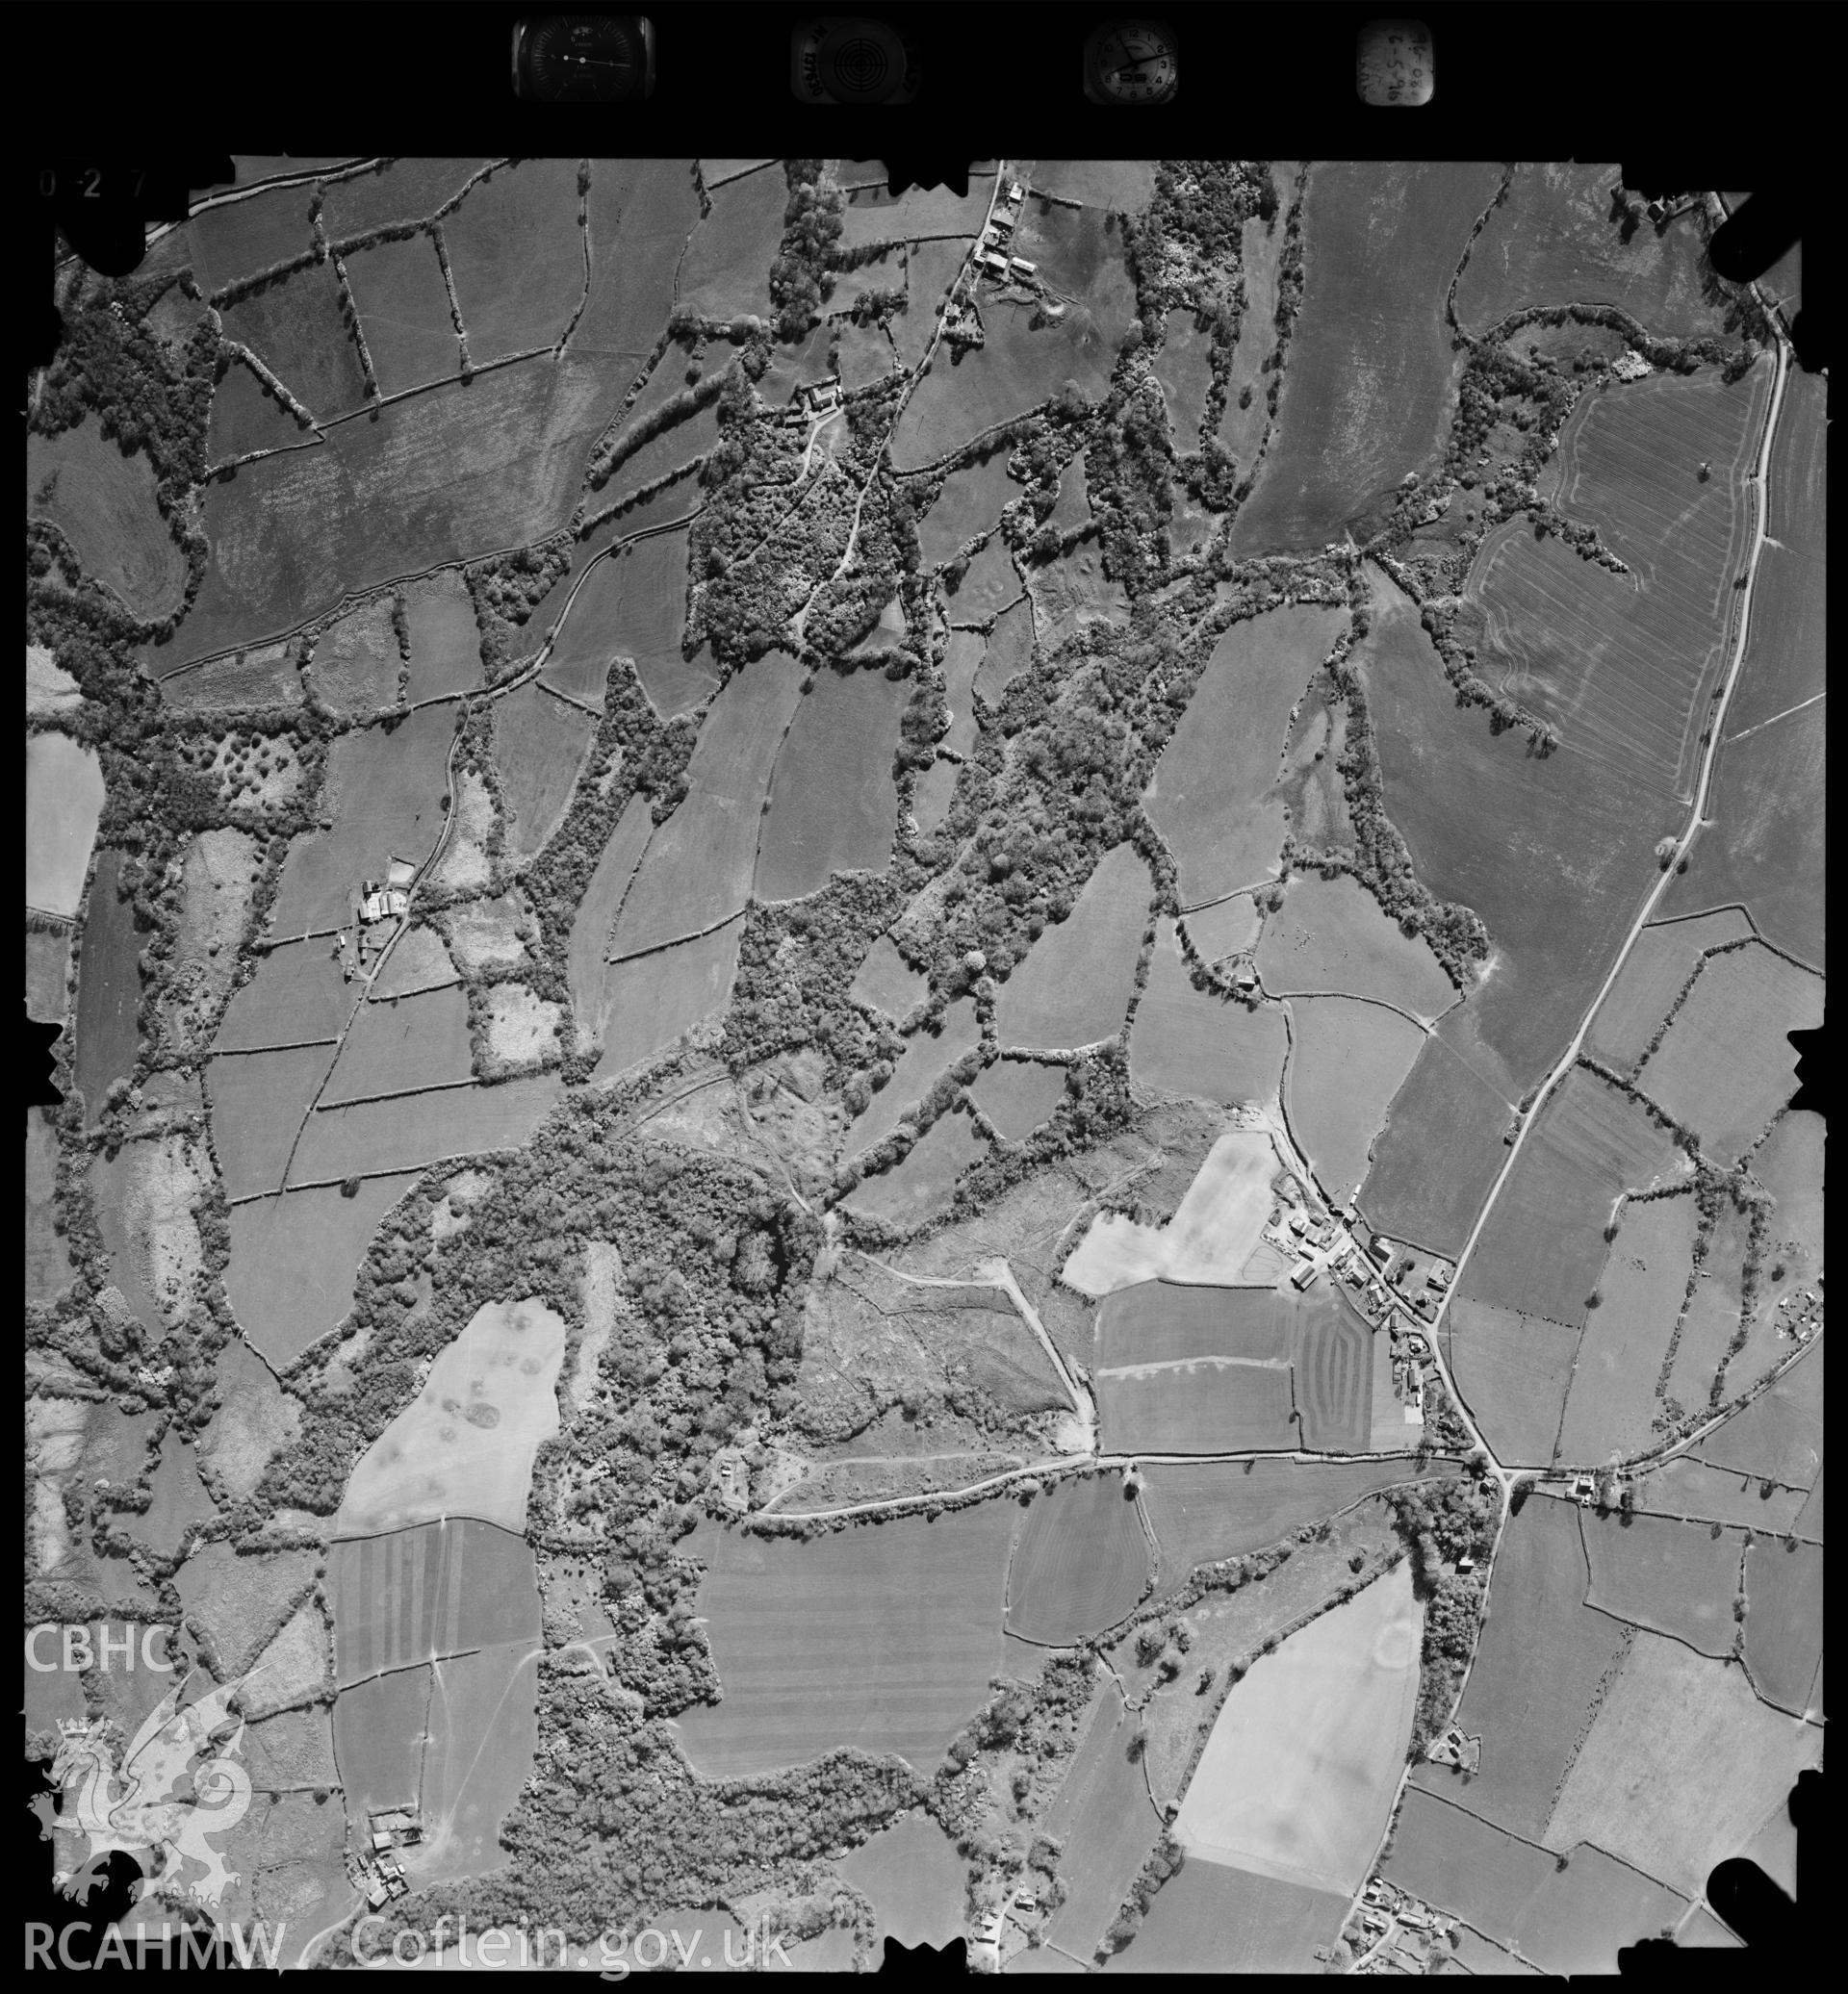 Digitized copy of an aerial view of the village of Lanesend near Cresselly, Pembrokeshire taken by Ordnance Survey, 1996